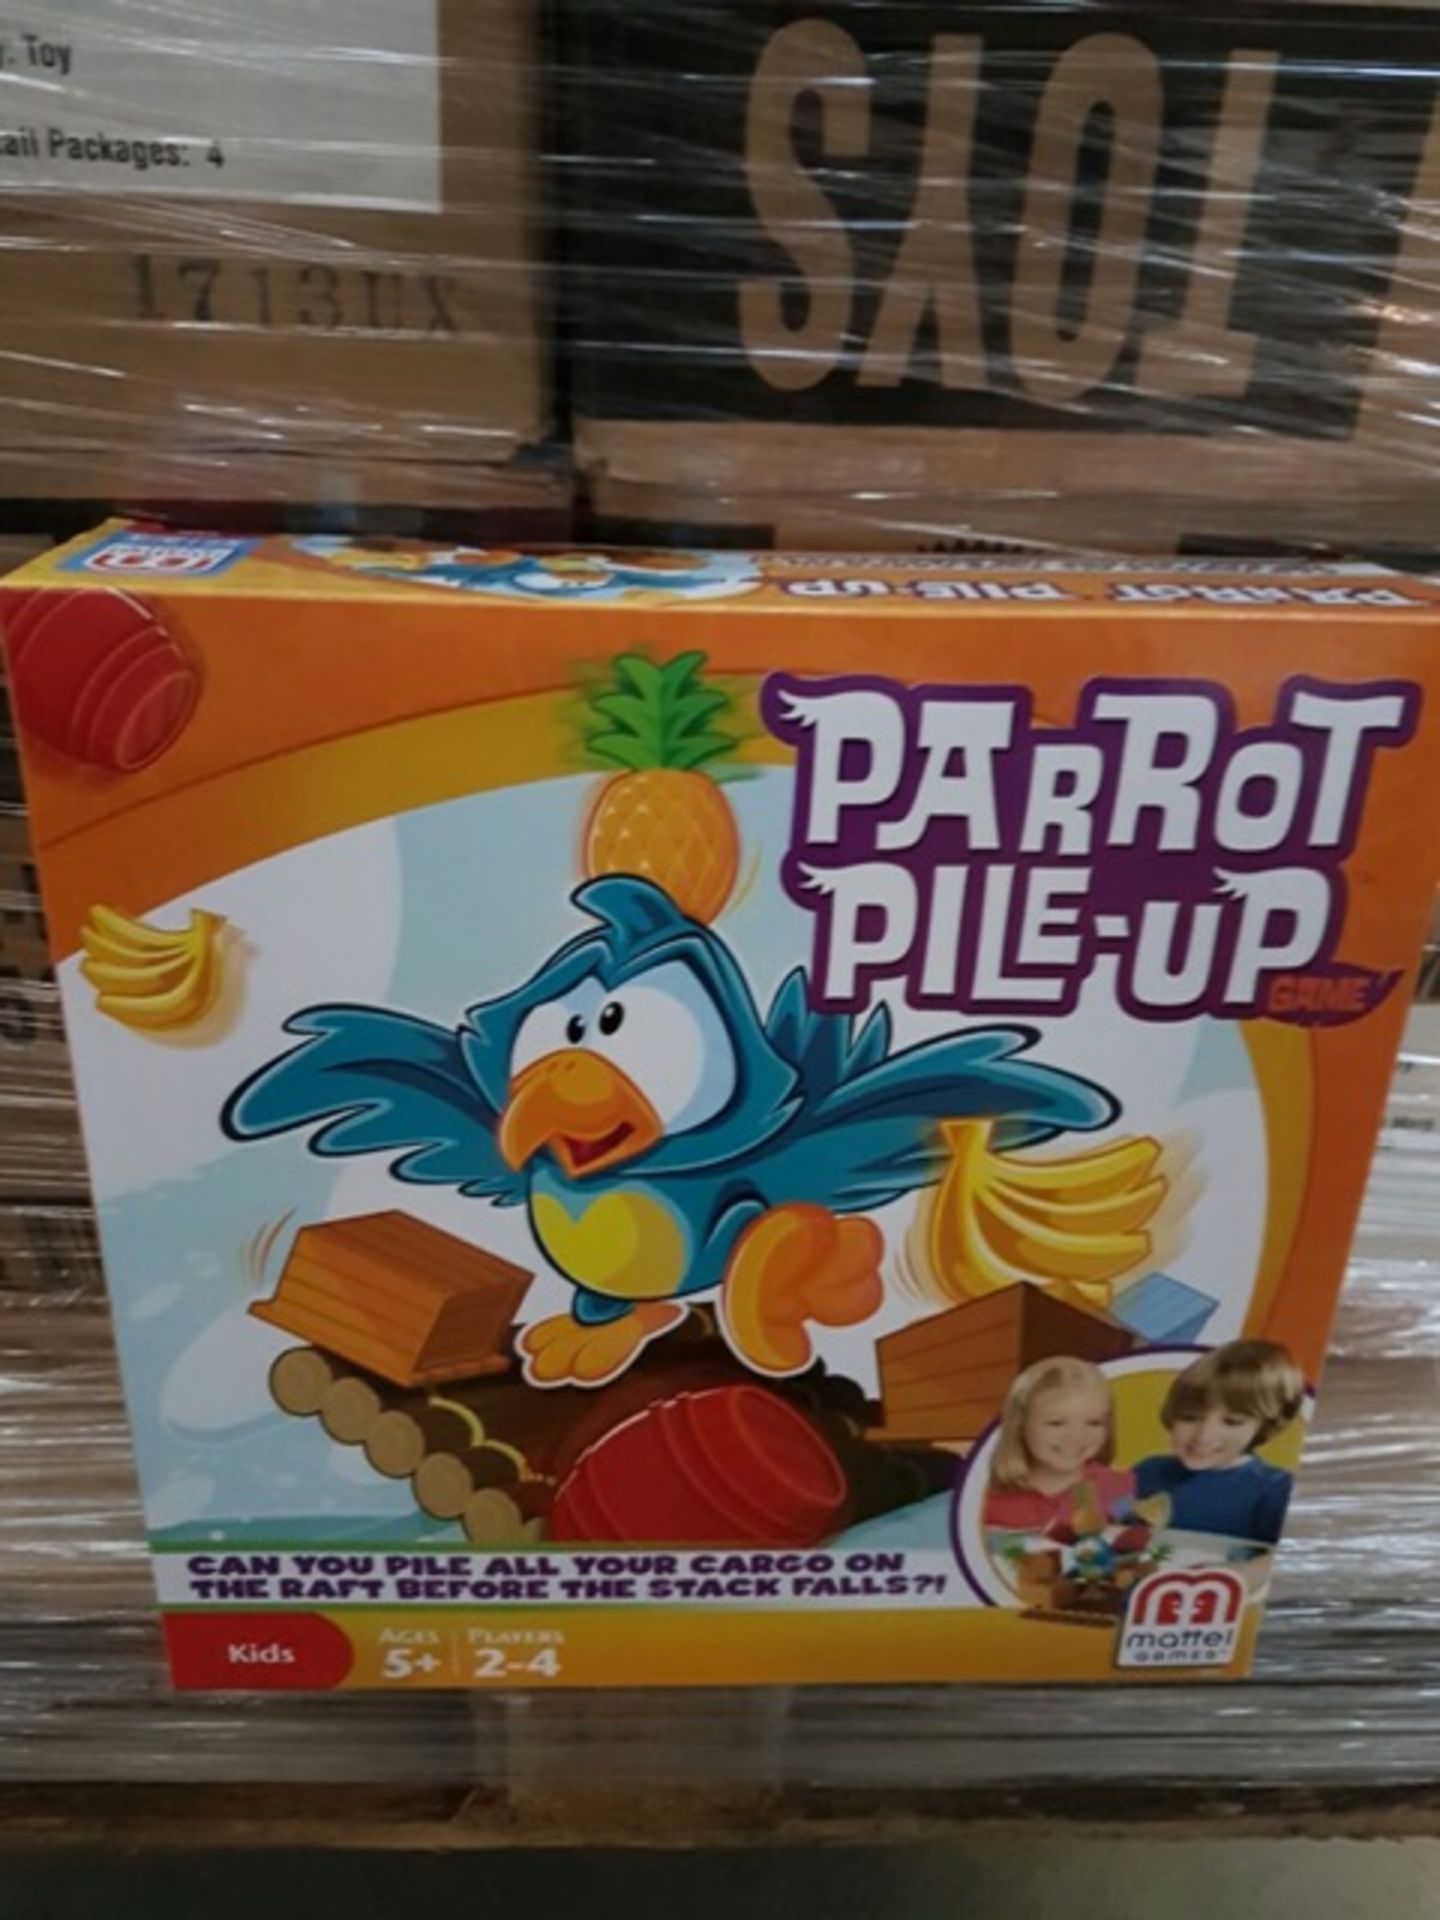 12 x Brand New Mattel Parrot Pile Up Game. Can you pile all your cargo on the raft before it